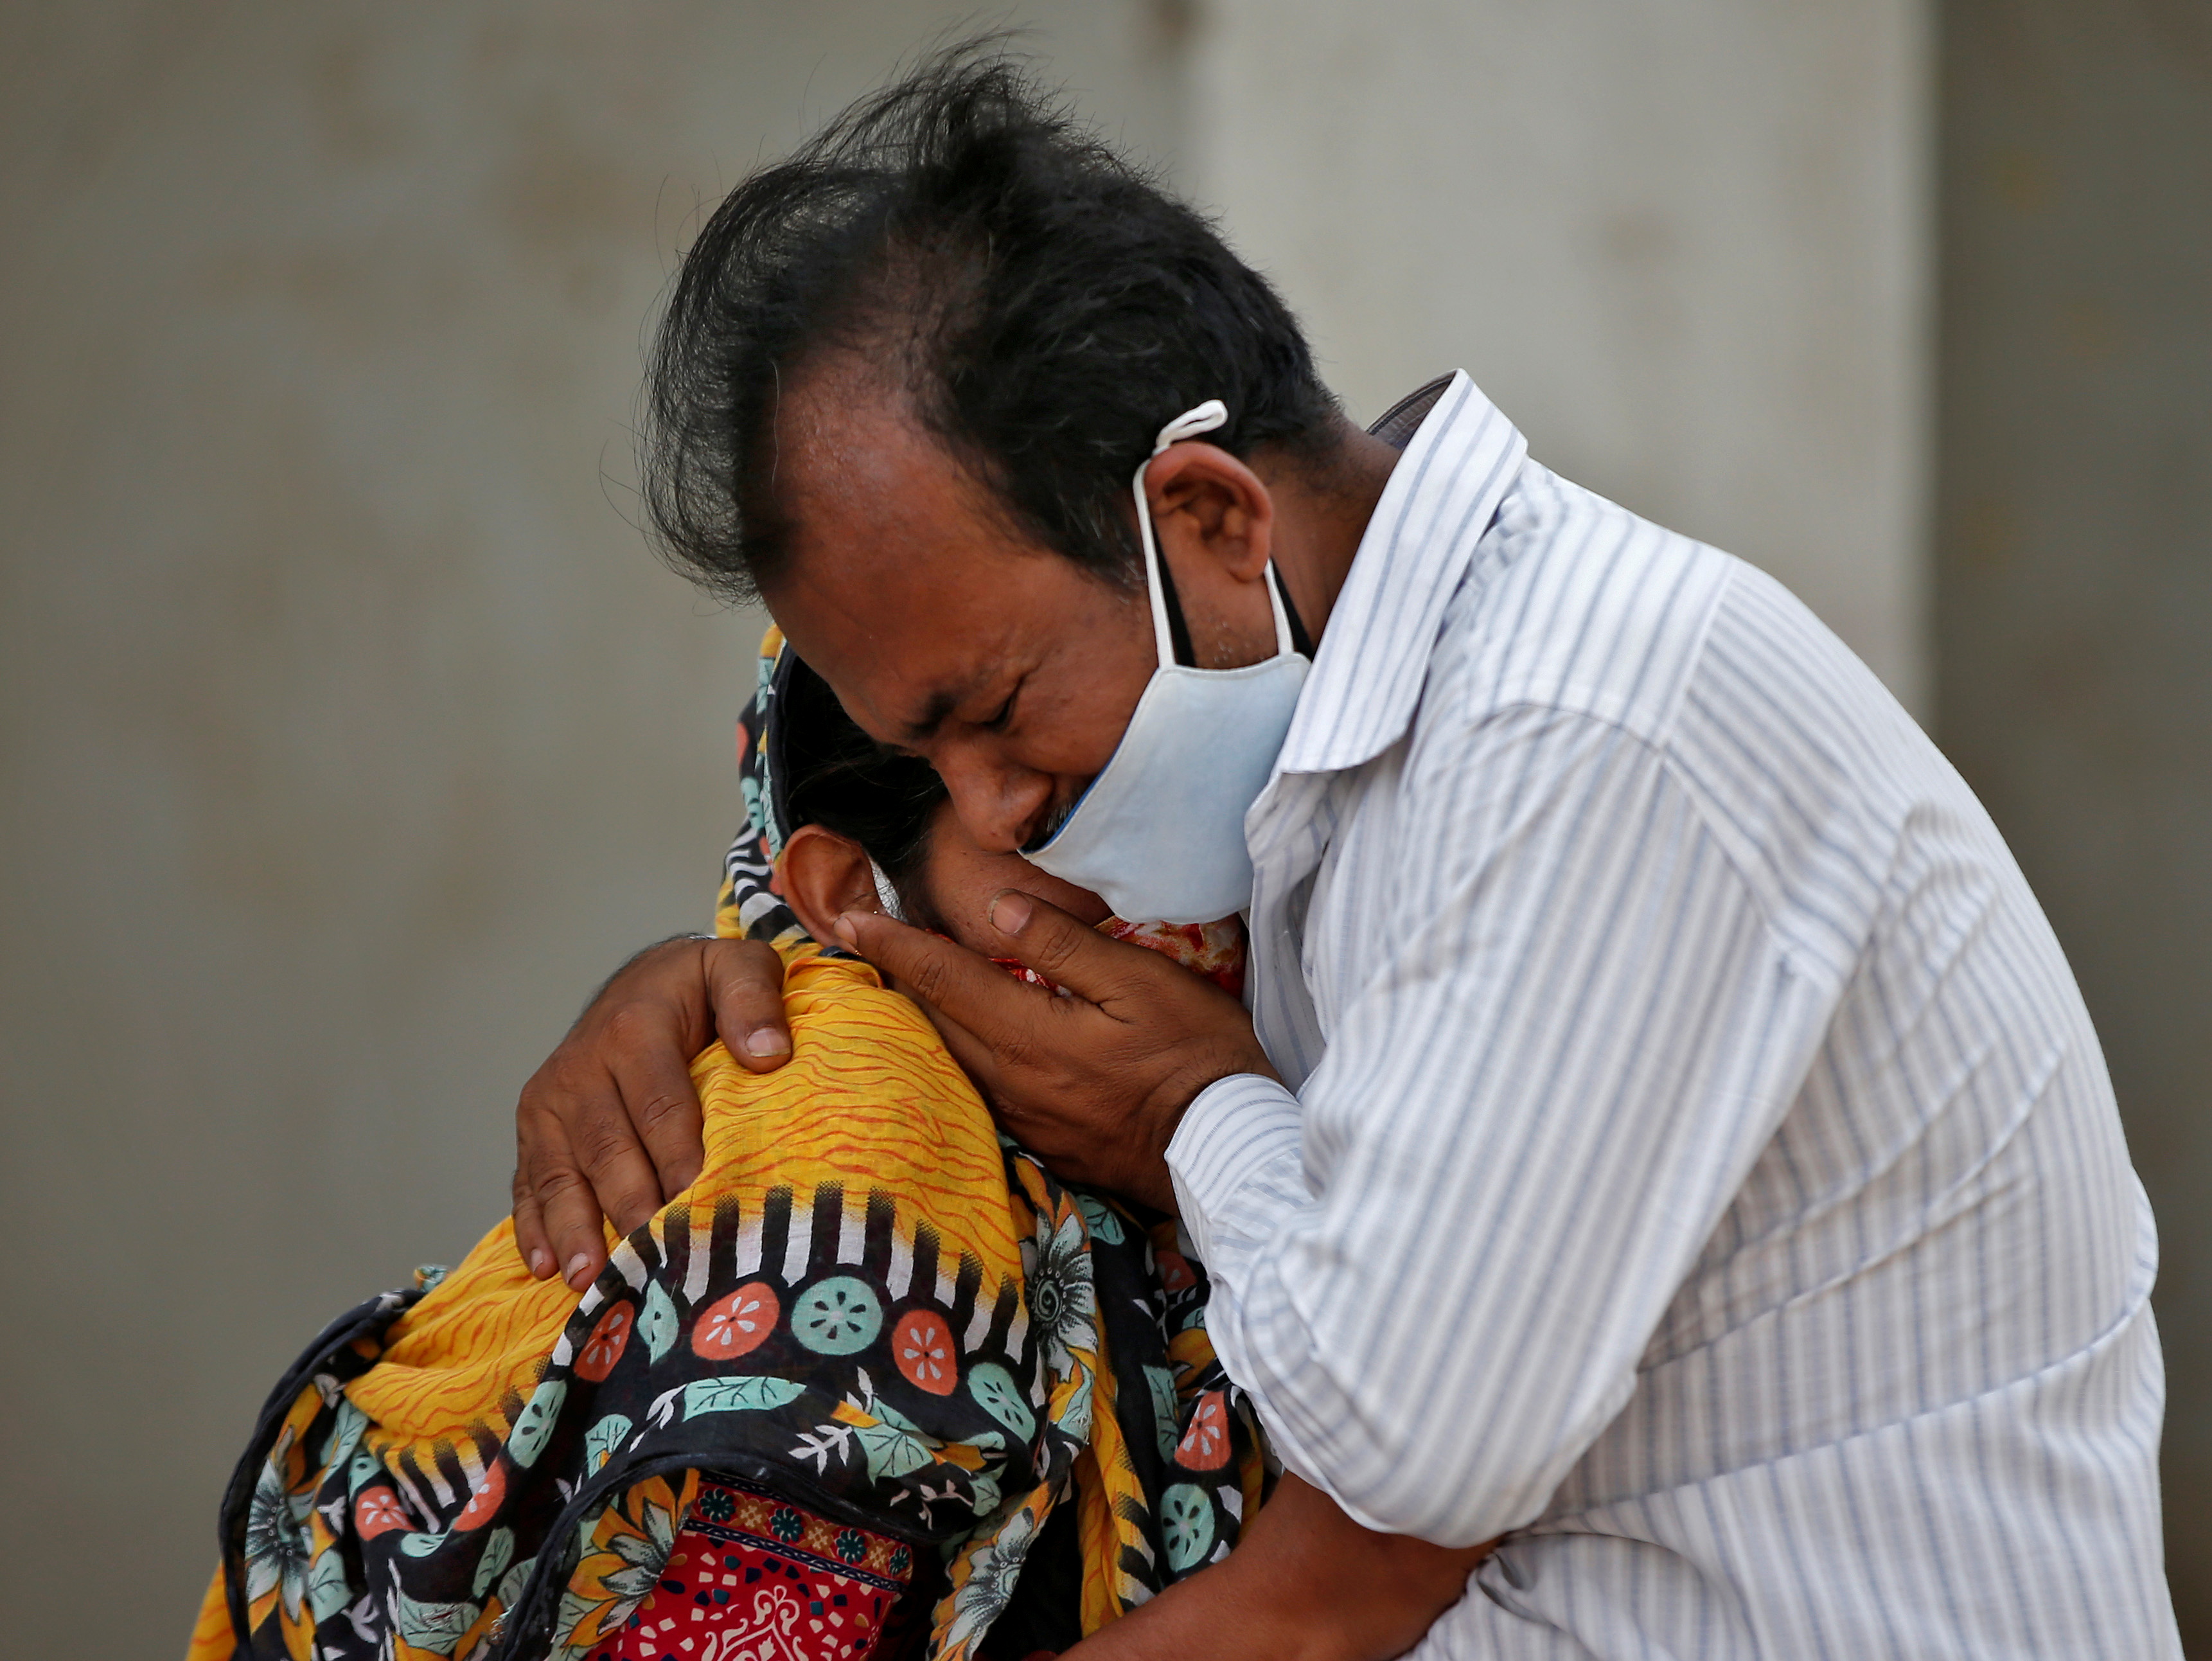 A woman is consoled by her relative after her husband died from the coronavirus disease (COVID-19) outside a COVID-19 hospital in Ahmedabad, India, April 26, 2021. REUTERS/Amit Dave